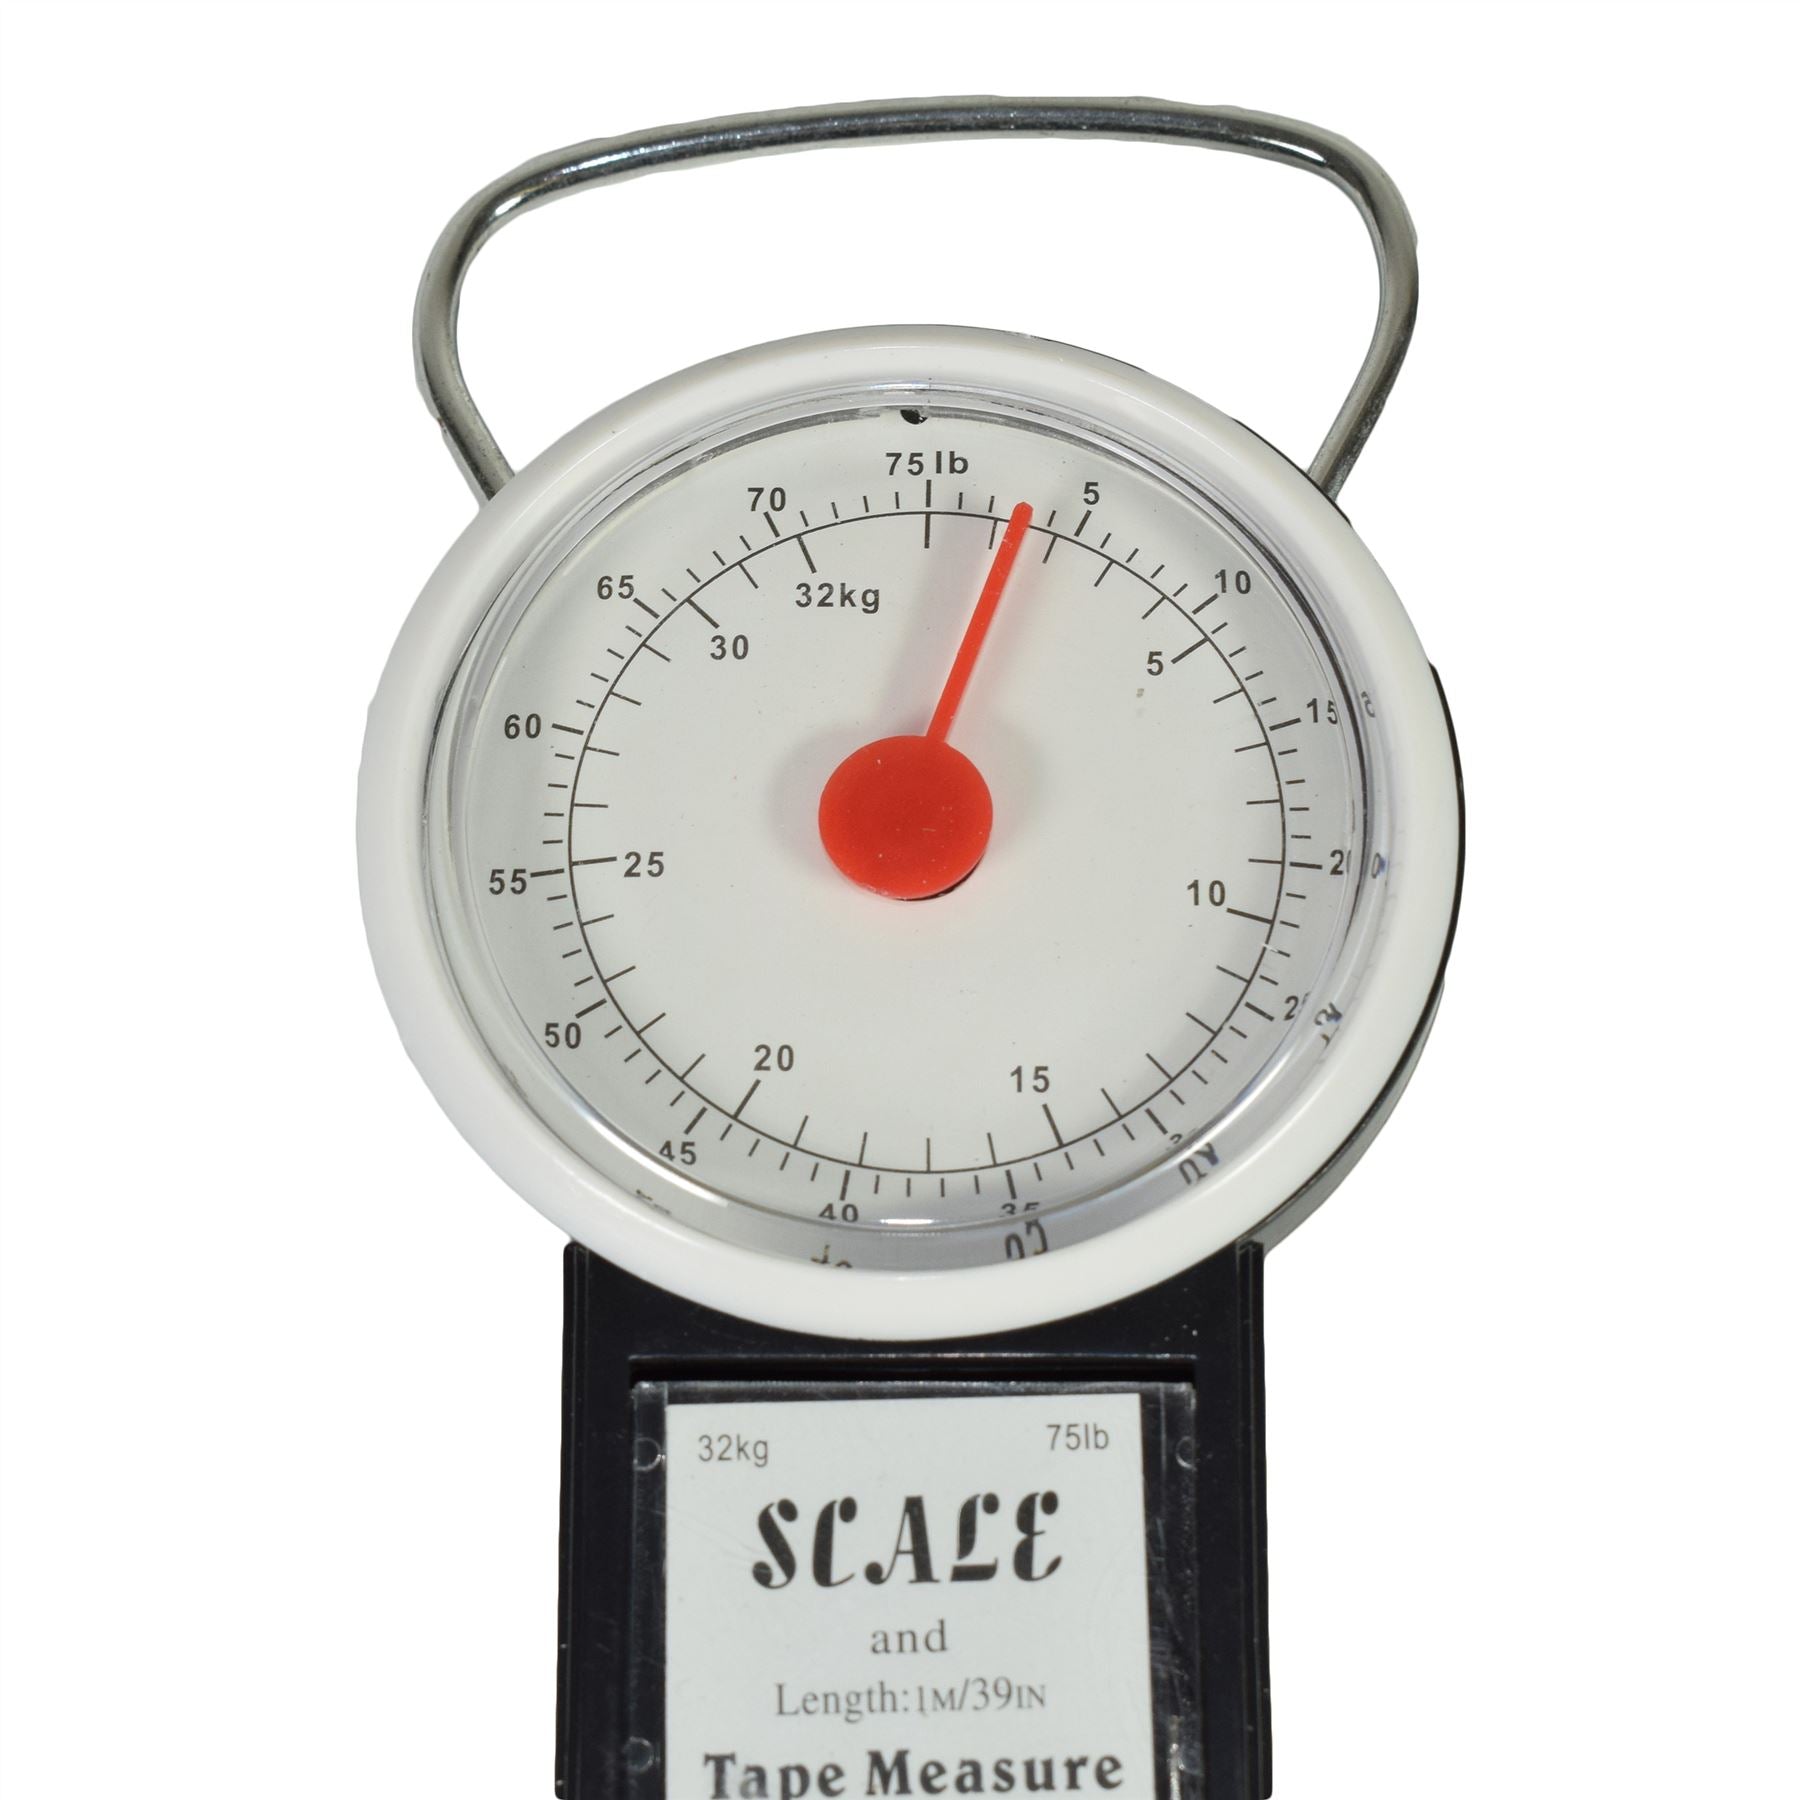 34kg / 75lb Luggage Weighing Scales With 1 Metre Measuring Tape Measure